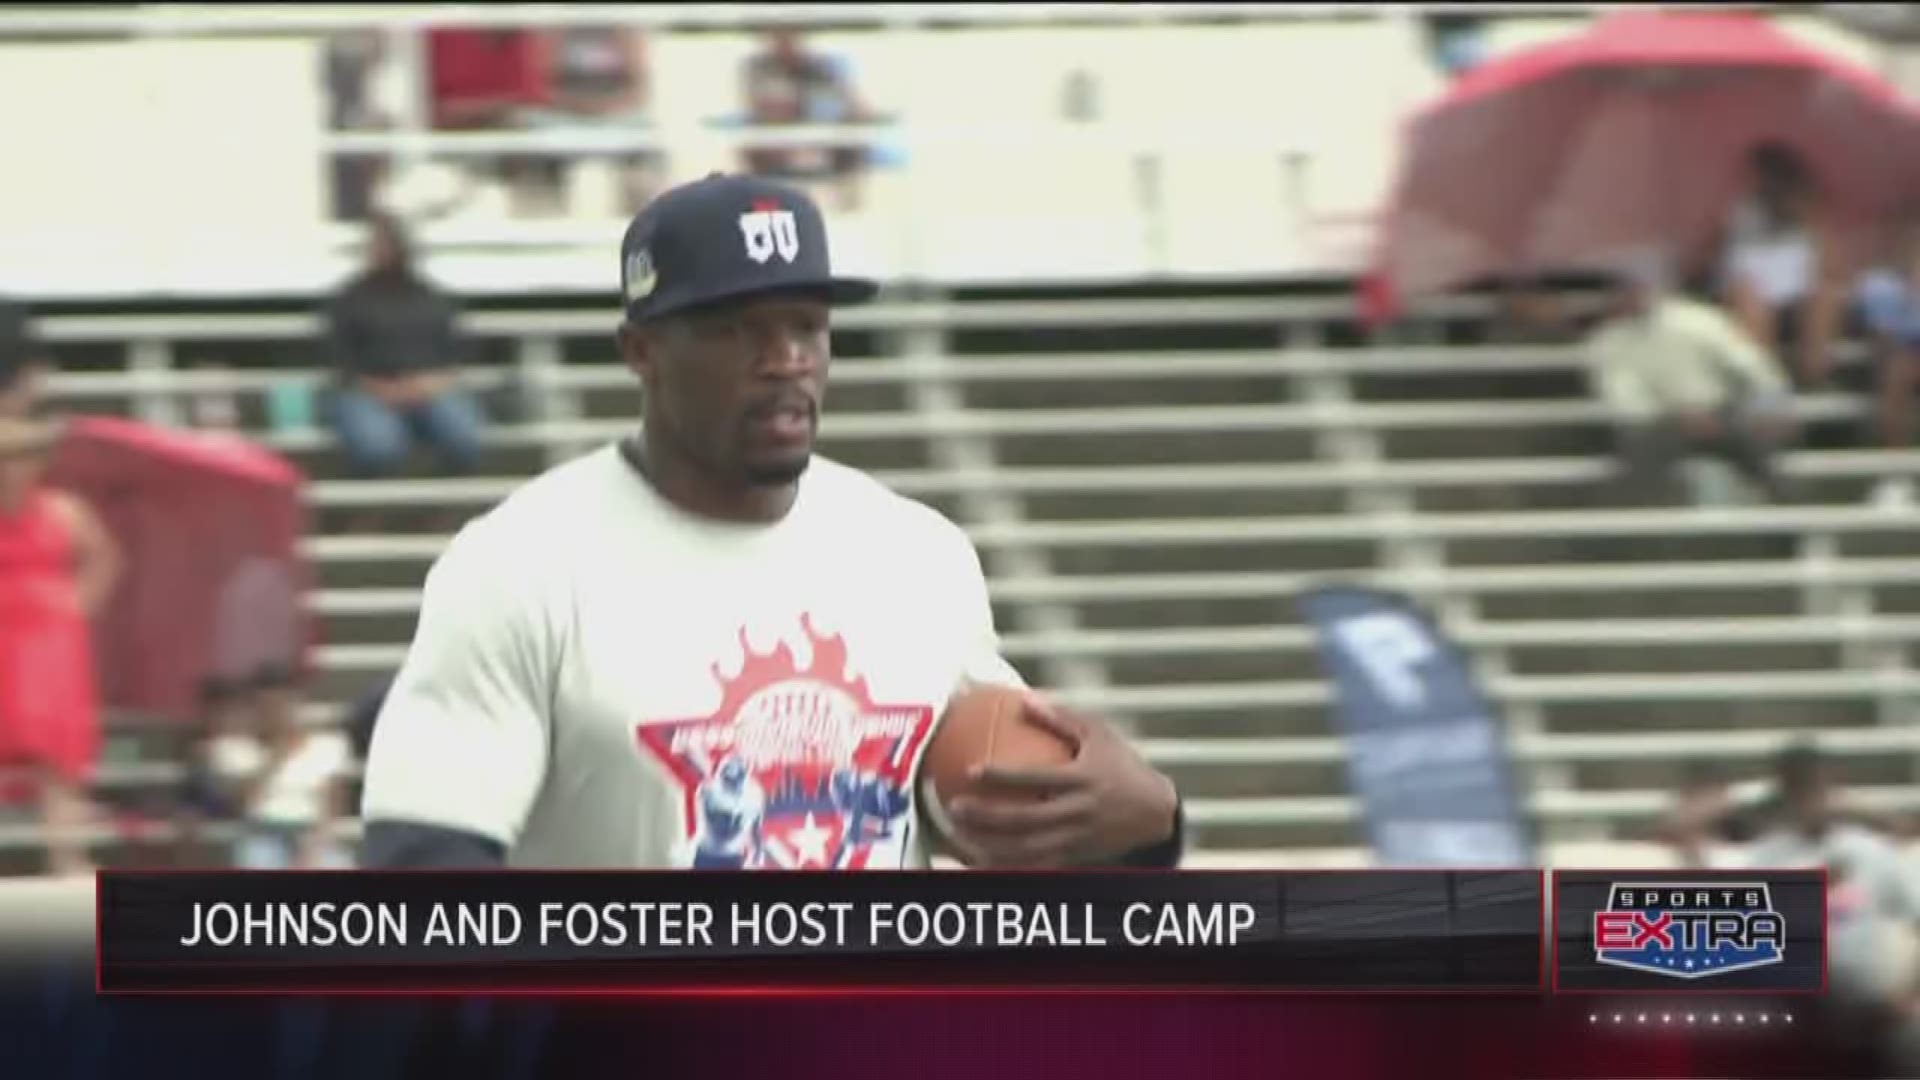 Young athletes got to workout with the pros as Arian Foster and Andre Johnson team up to host a "Lessons by Legends" football camp at Thorne Stadium in the Aldine area.